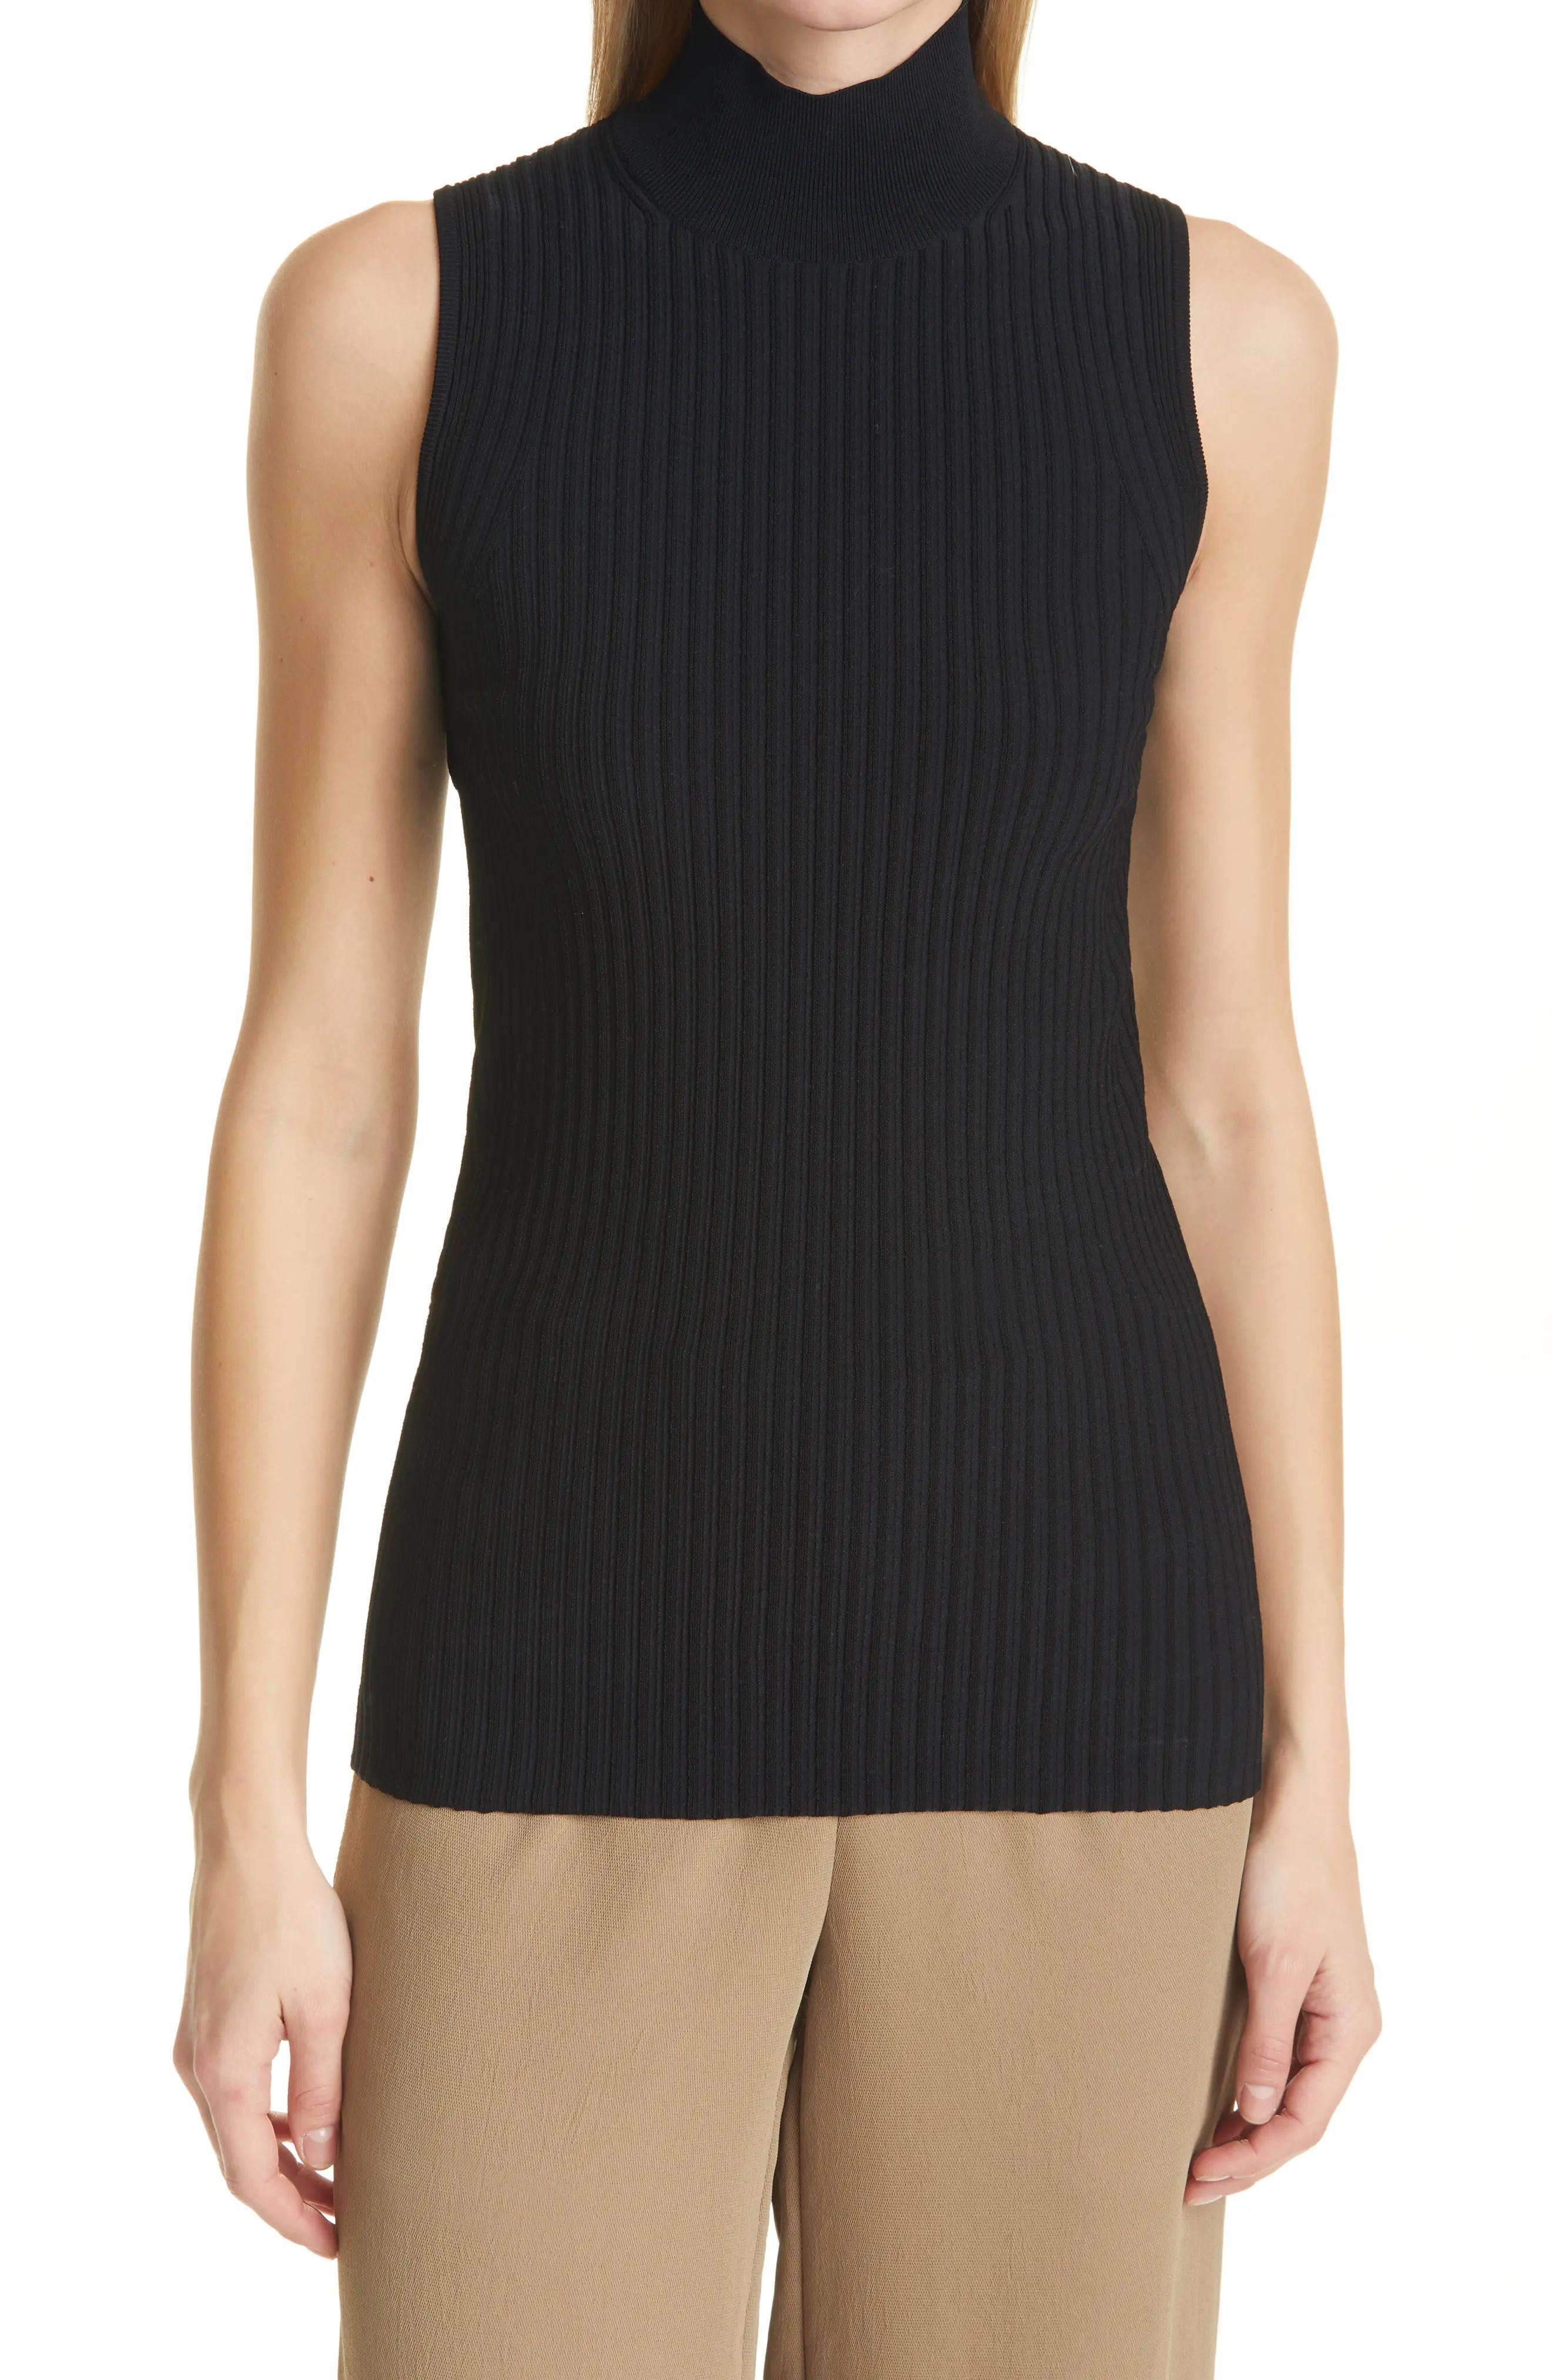 Women's Proenza Schouler Cutout Back Ribbed Sleeveless Turtleneck Sweater, Size Small - Black | Nordstrom